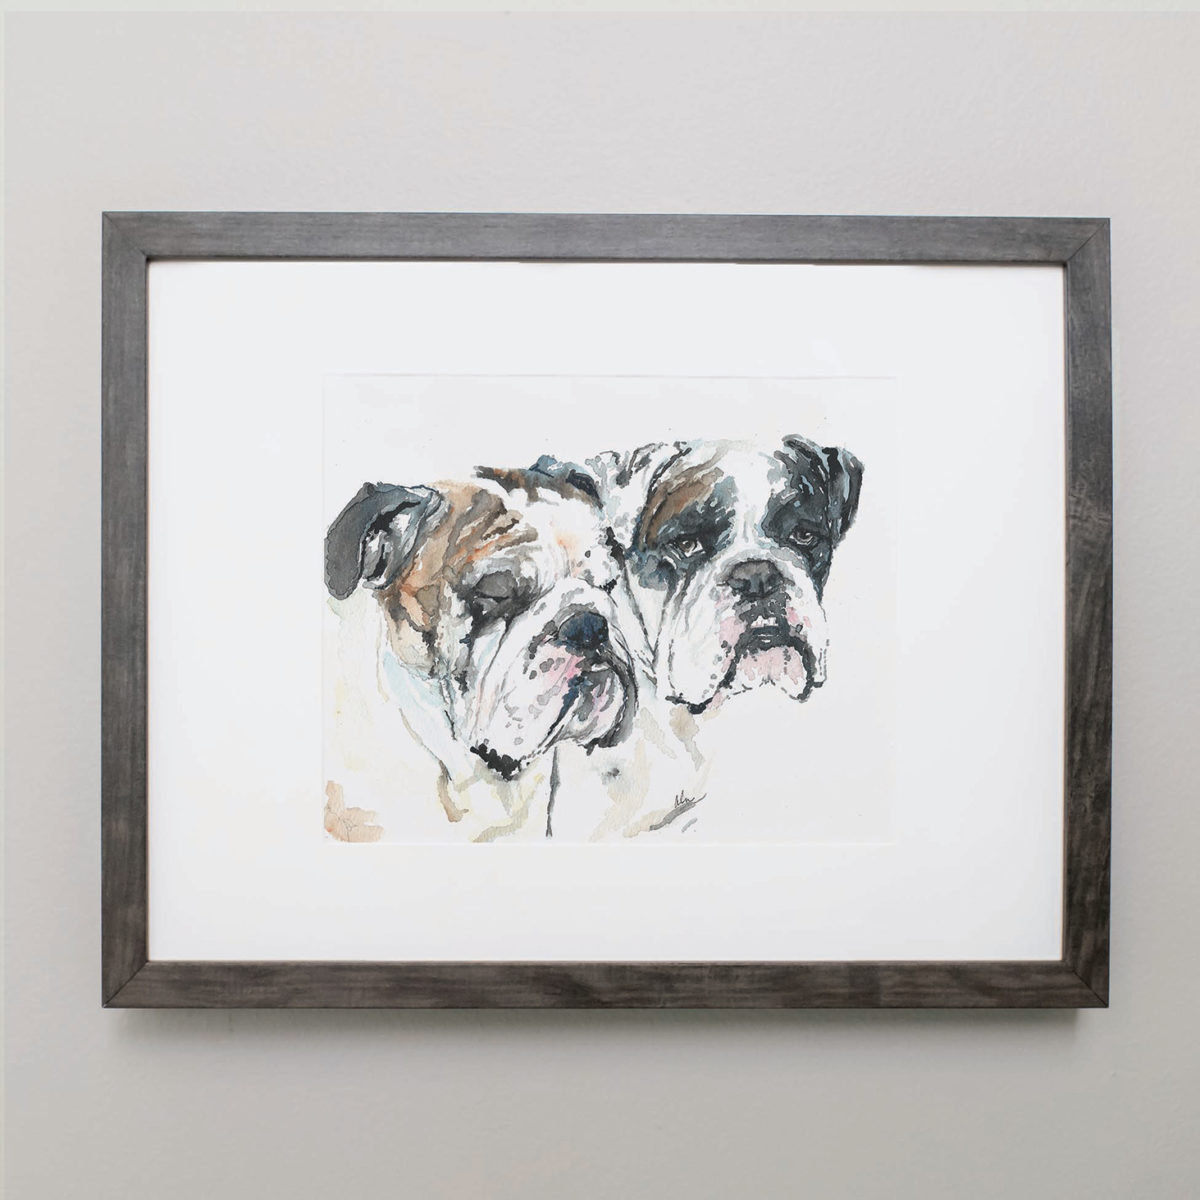 Watercolor of two bulldogs in a gray frame